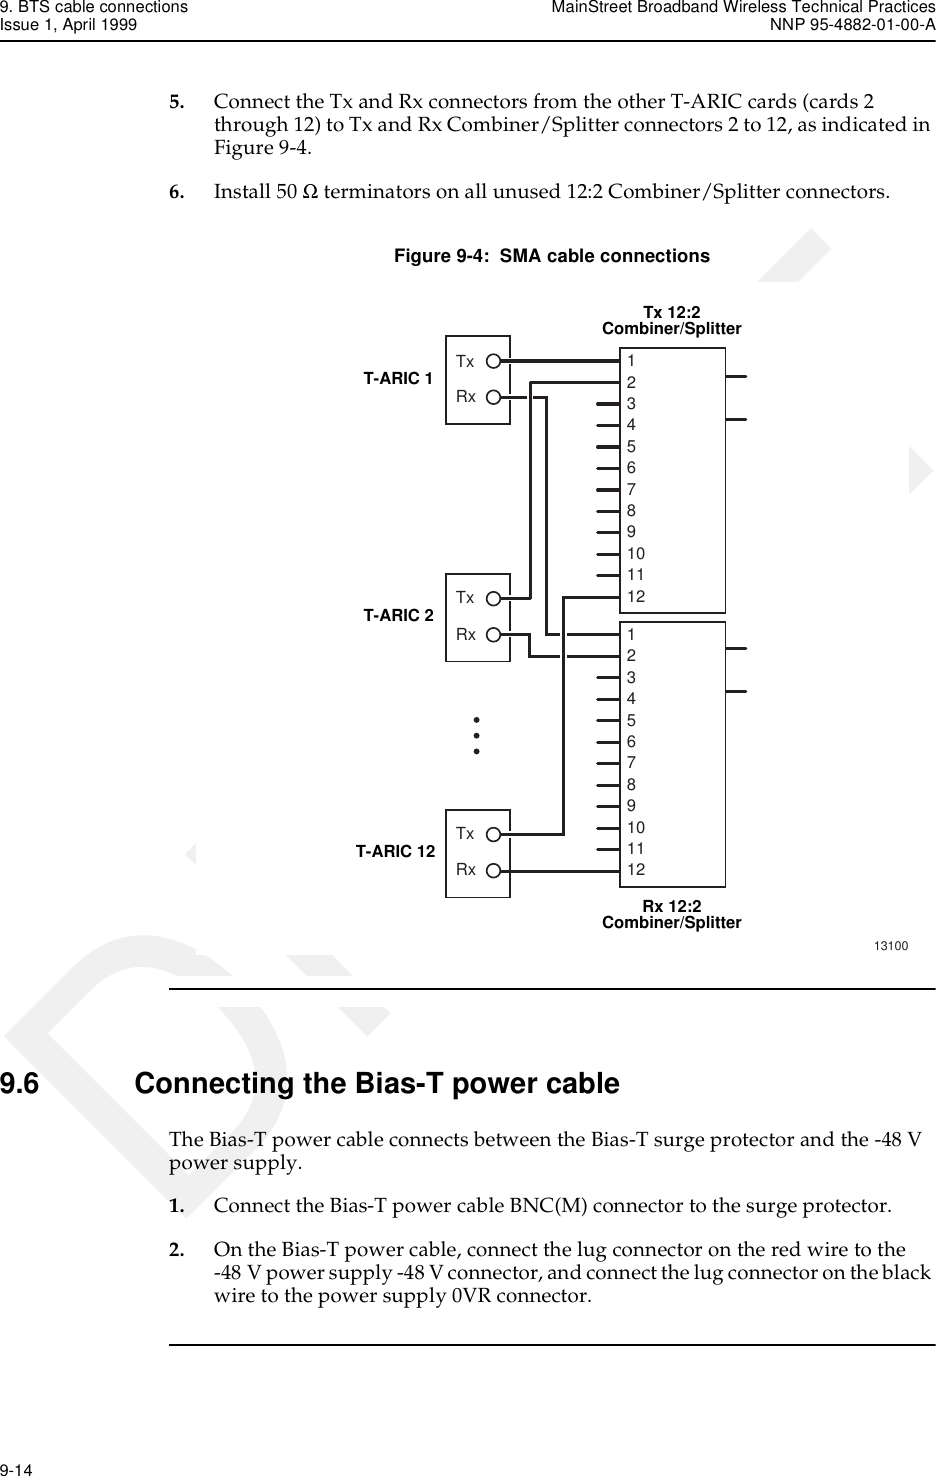 9. BTS cable connections MainStreet Broadband Wireless Technical PracticesIssue 1, April 1999 NNP 95-4882-01-00-A9-14   DRAFT5. Connect the Tx and Rx connectors from the other T-ARIC cards (cards 2 through 12) to Tx and Rx Combiner/Splitter connectors 2 to 12, as indicated in Figure 9-4.6. Install 50 Ω terminators on all unused 12:2 Combiner/Splitter connectors.Figure 9-4:  SMA cable connections9.6 Connecting the Bias-T power cableThe Bias-T power cable connects between the Bias-T surge protector and the -48 V power supply.1. Connect the Bias-T power cable BNC(M) connector to the surge protector.2. On the Bias-T power cable, connect the lug connector on the red wire to the -48 V power supply -48 V connector, and connect the lug connector on the black wire to the power supply 0VR connector.13100T-ARIC 1Tx 12:2Combiner/SplitterRx 12:2Combiner/Splitter123456789101112123456789101112RxTxT-ARIC 2 TxRxT-ARIC 12 TxRx